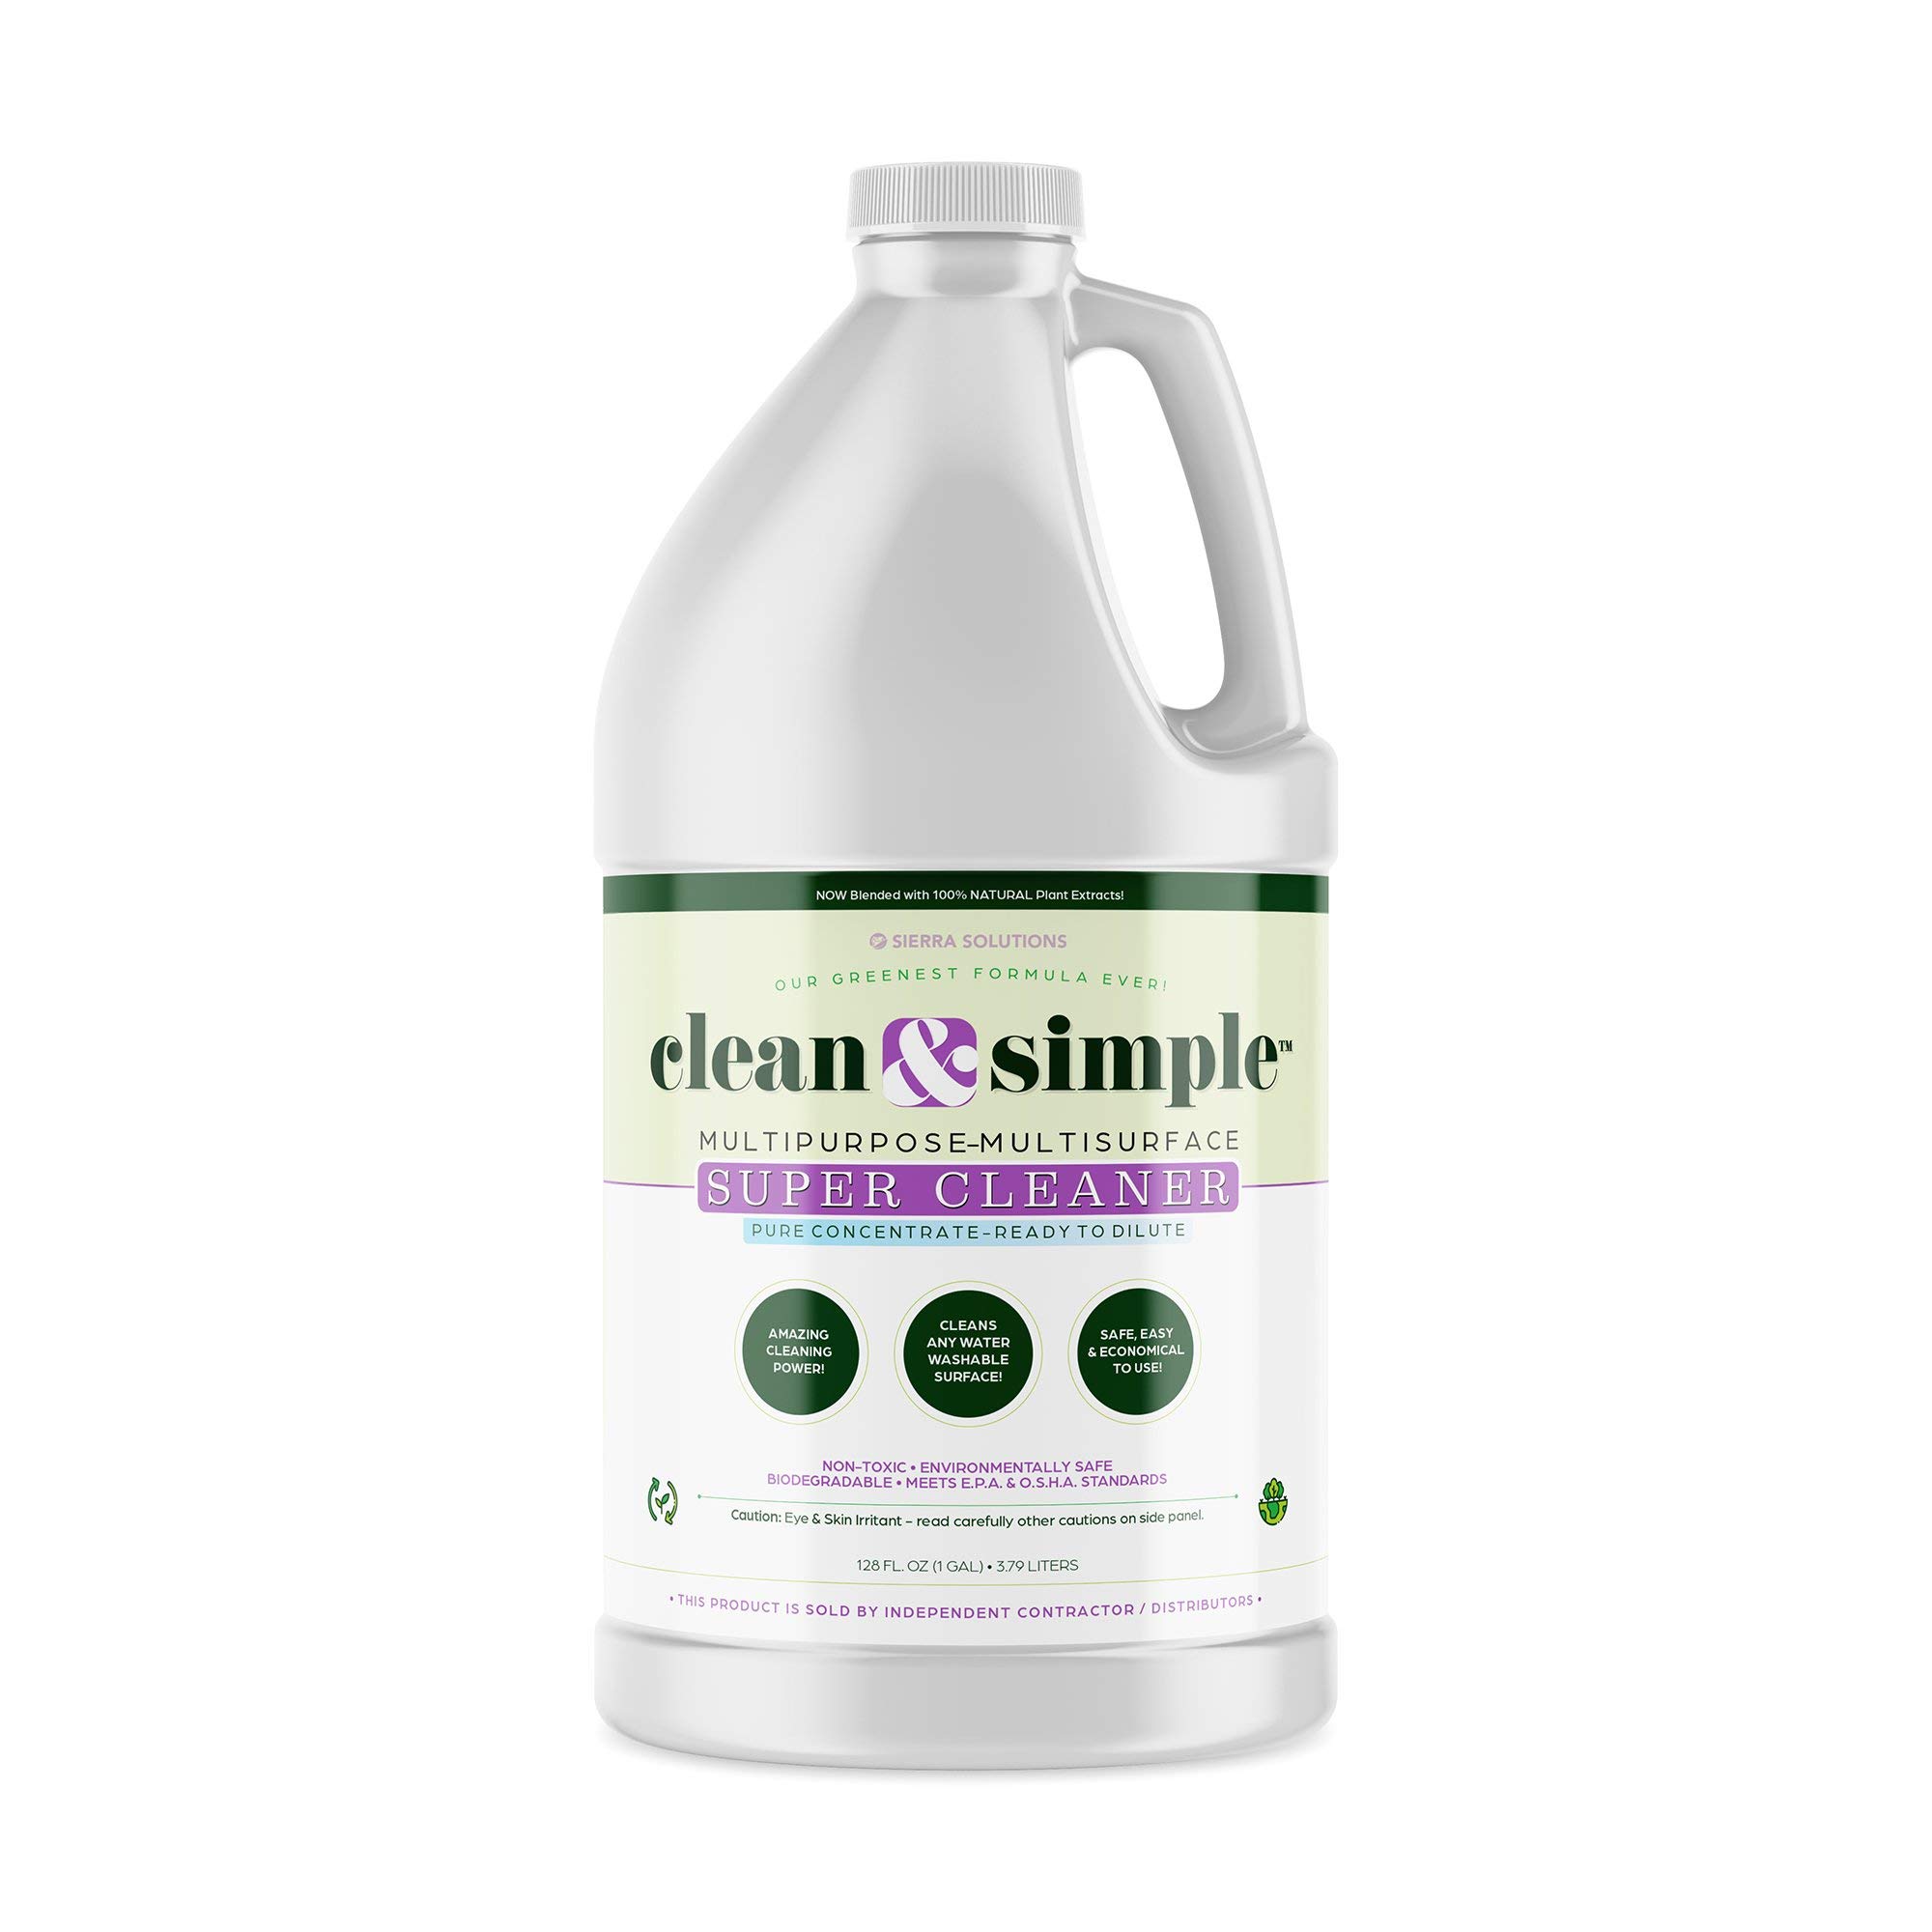 All Purpose household cleaner, clean & simple, concentrate by Sierra Solutions (1 Gallon)